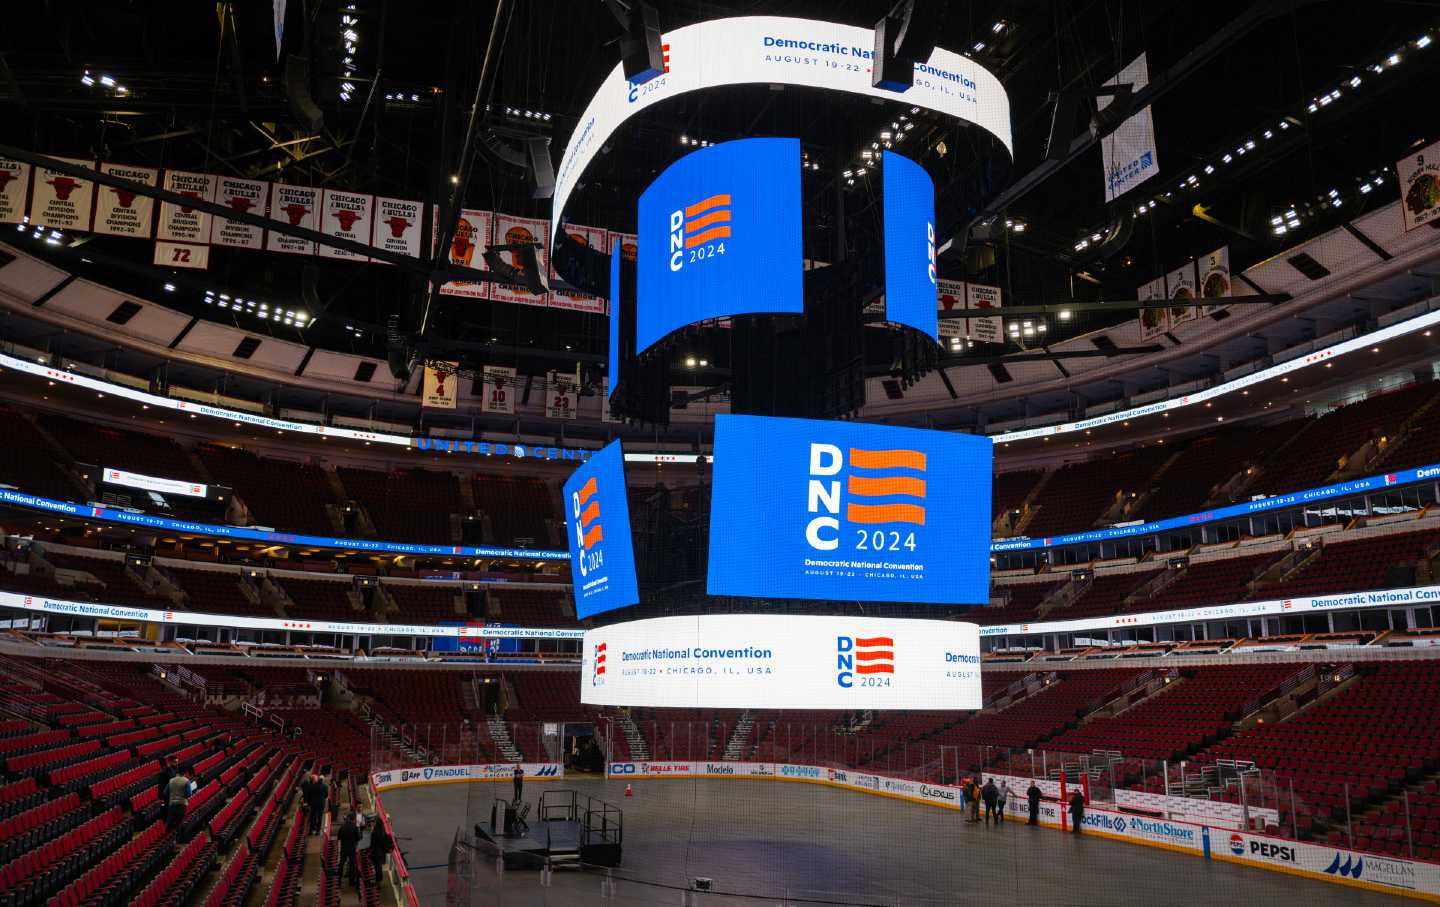 The logo for the Democratic National Convention is displayed on the scoreboard at the United Center during a media walkthrough on January 18, 2024, in Chicago, Illinois.